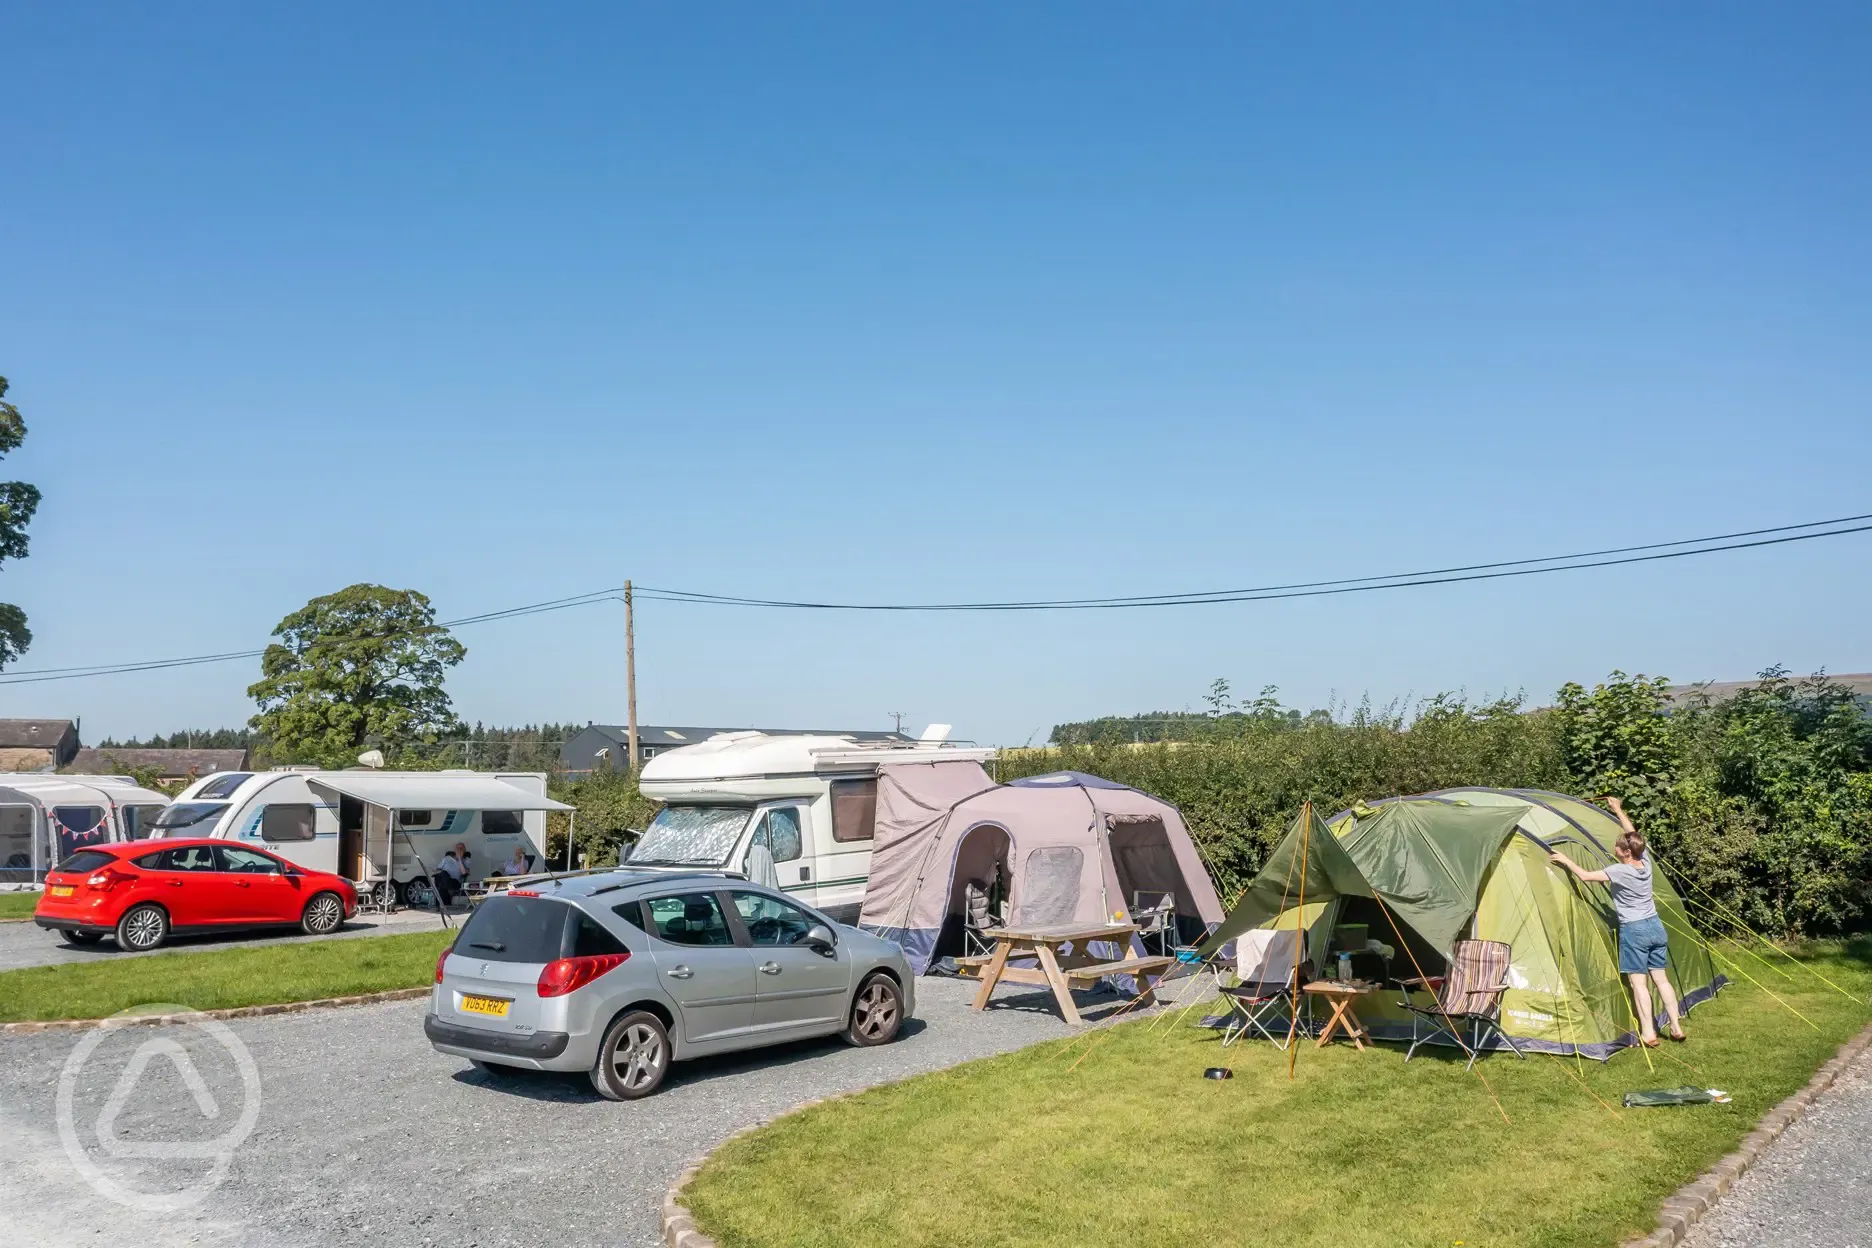 Fully serviced hardstanding touring pitches